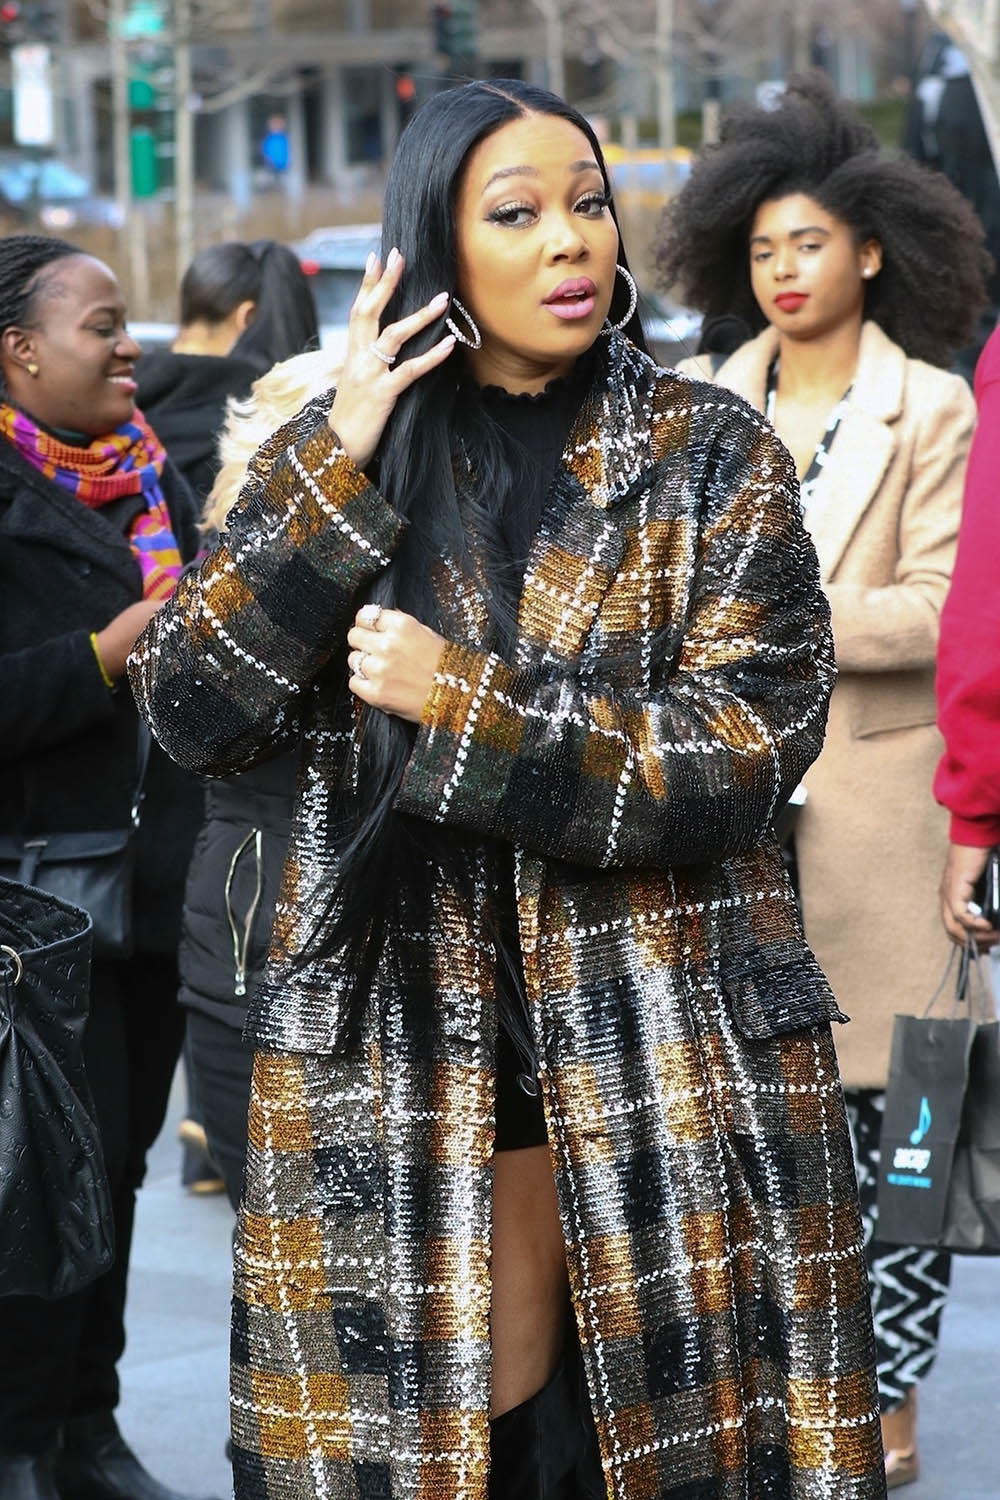 Monica at JAY-Z's Roc Nation Brunch in NYC